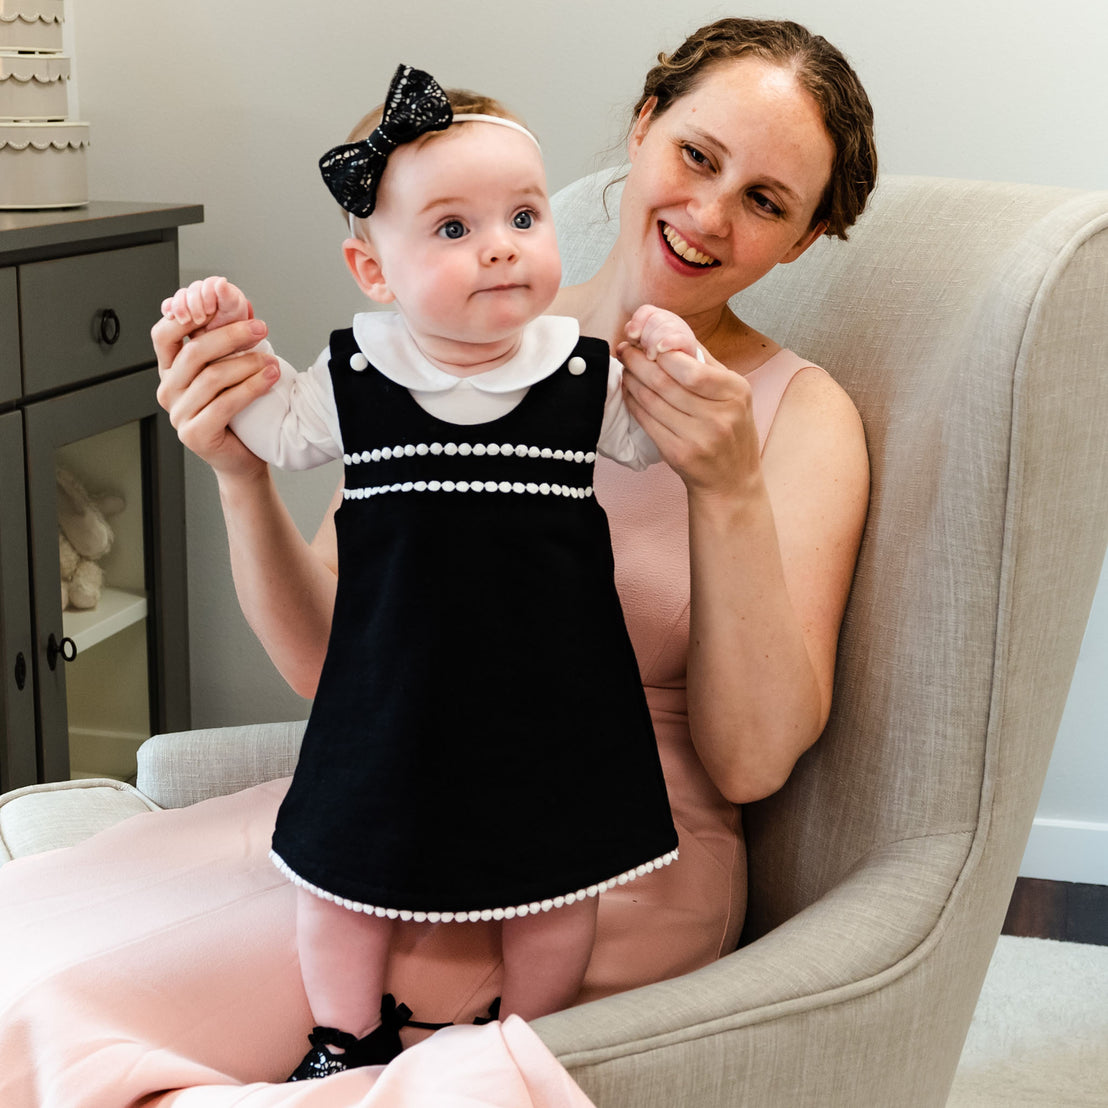 A woman in a beige chair smiling, holding a baby girl dressed in a stylish black and white outfit with a June Lace Bow Headband on her head after her christening. They seem happy in a light-colored room.